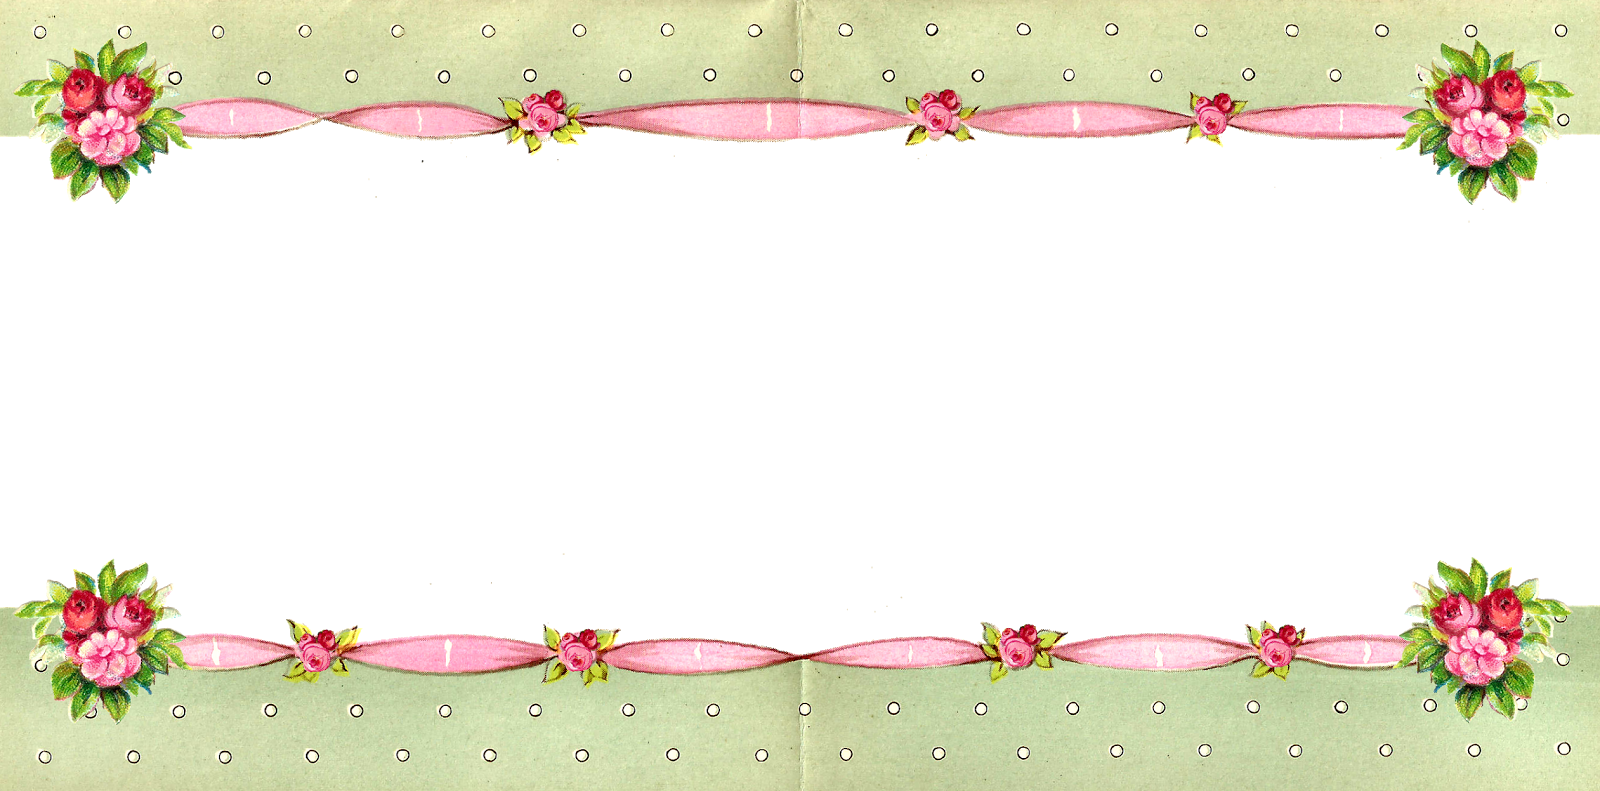 For A Wedding Project The Rose Ribbon Border Would - Retro Girly Rosa Rosen Und Polka-punkte Keramikfliese (1600x791)